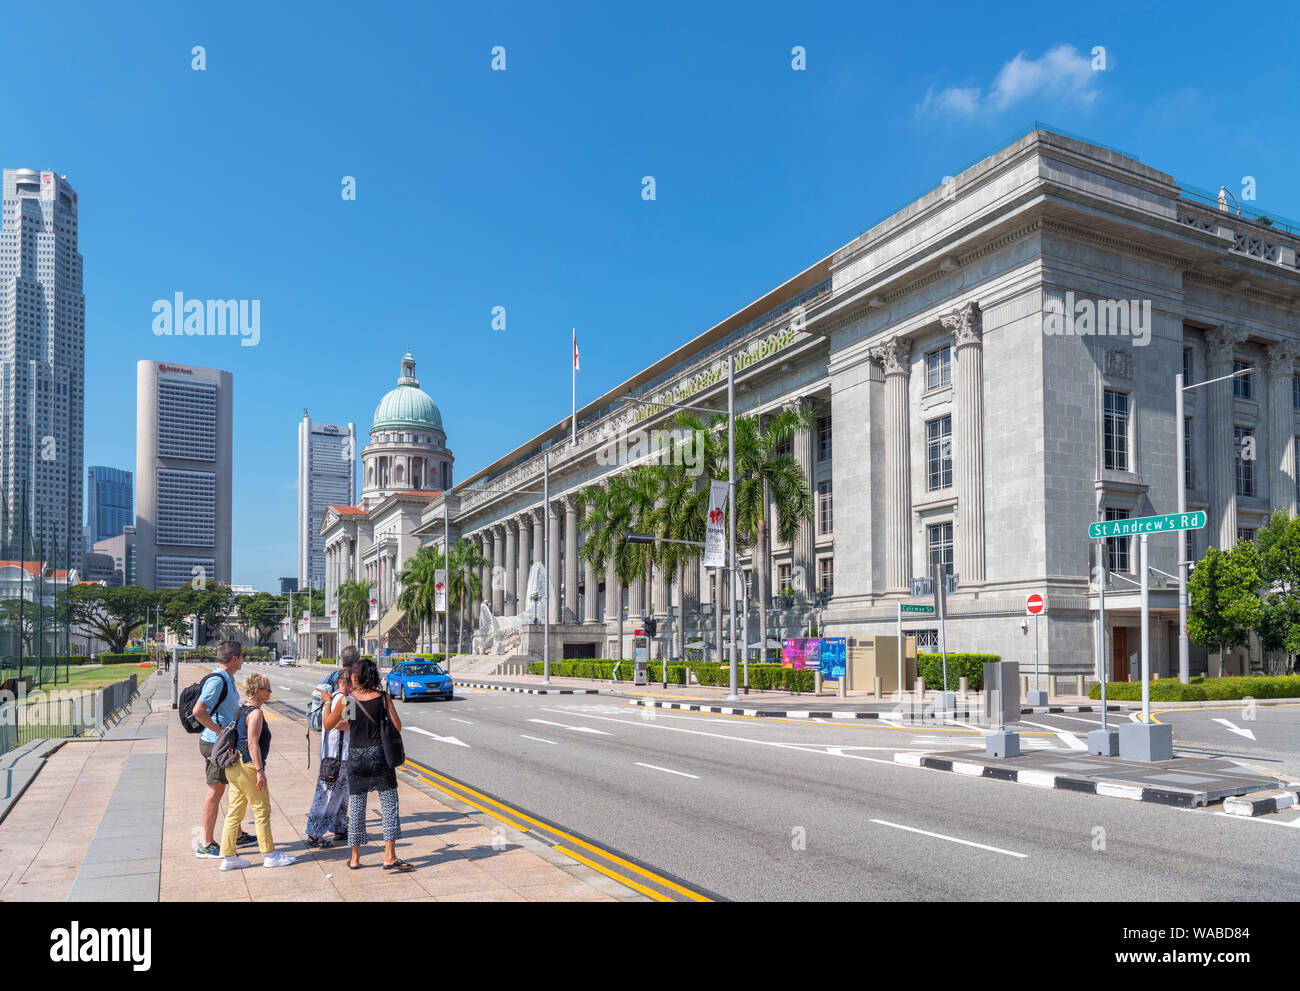 Tourists in front of the National Gallery of Singapore, housed in the old City Hall and Supreme Court buildings, St Andrew's Road, Singapore Stock Photo